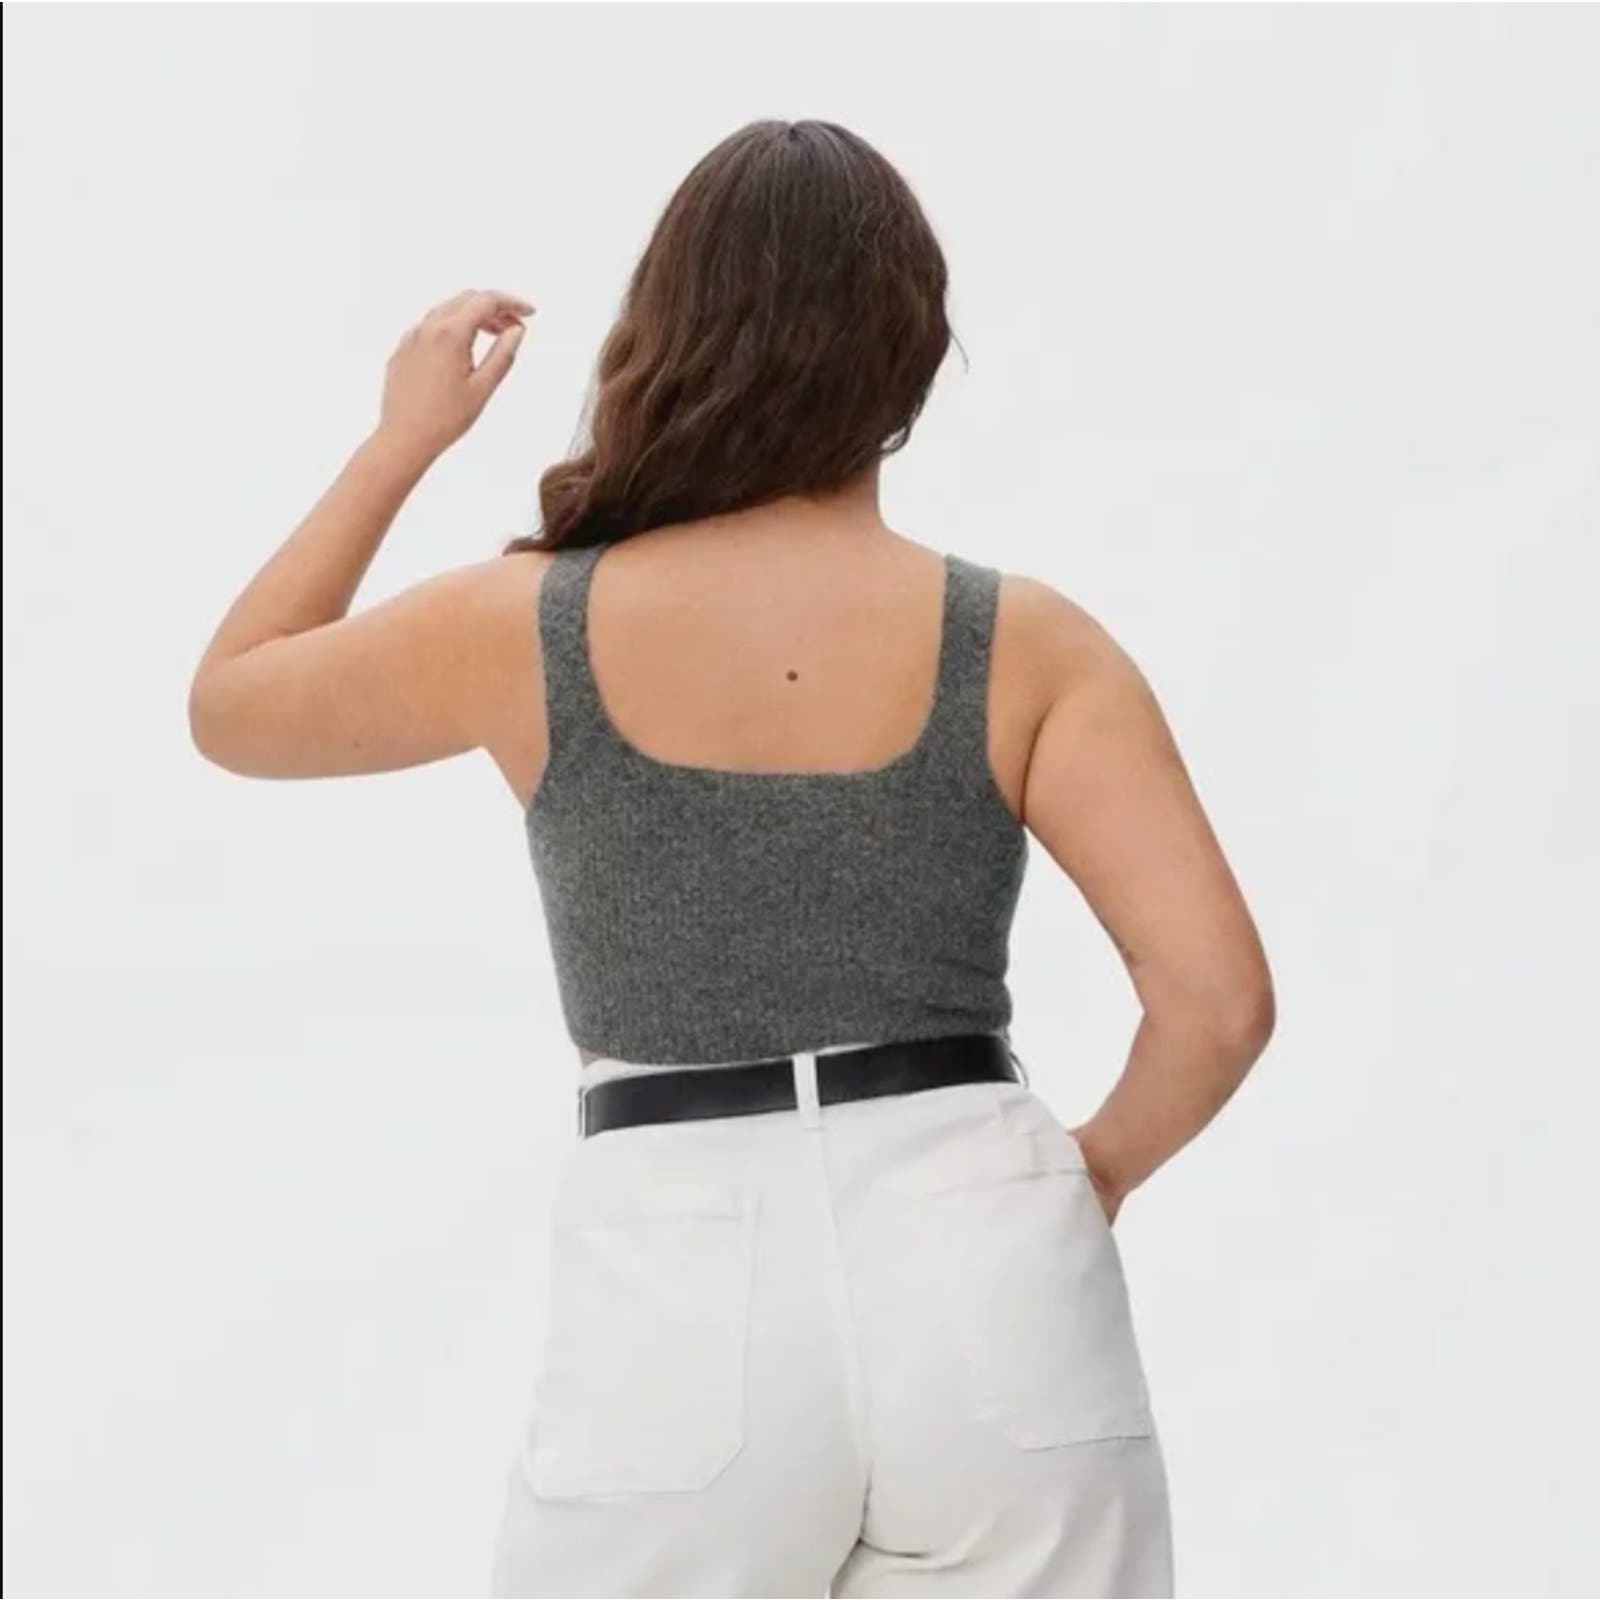 Everlane NWT The Cozy Stretch Tank Academia Wool Blend Crop Top Grey Size XSmall